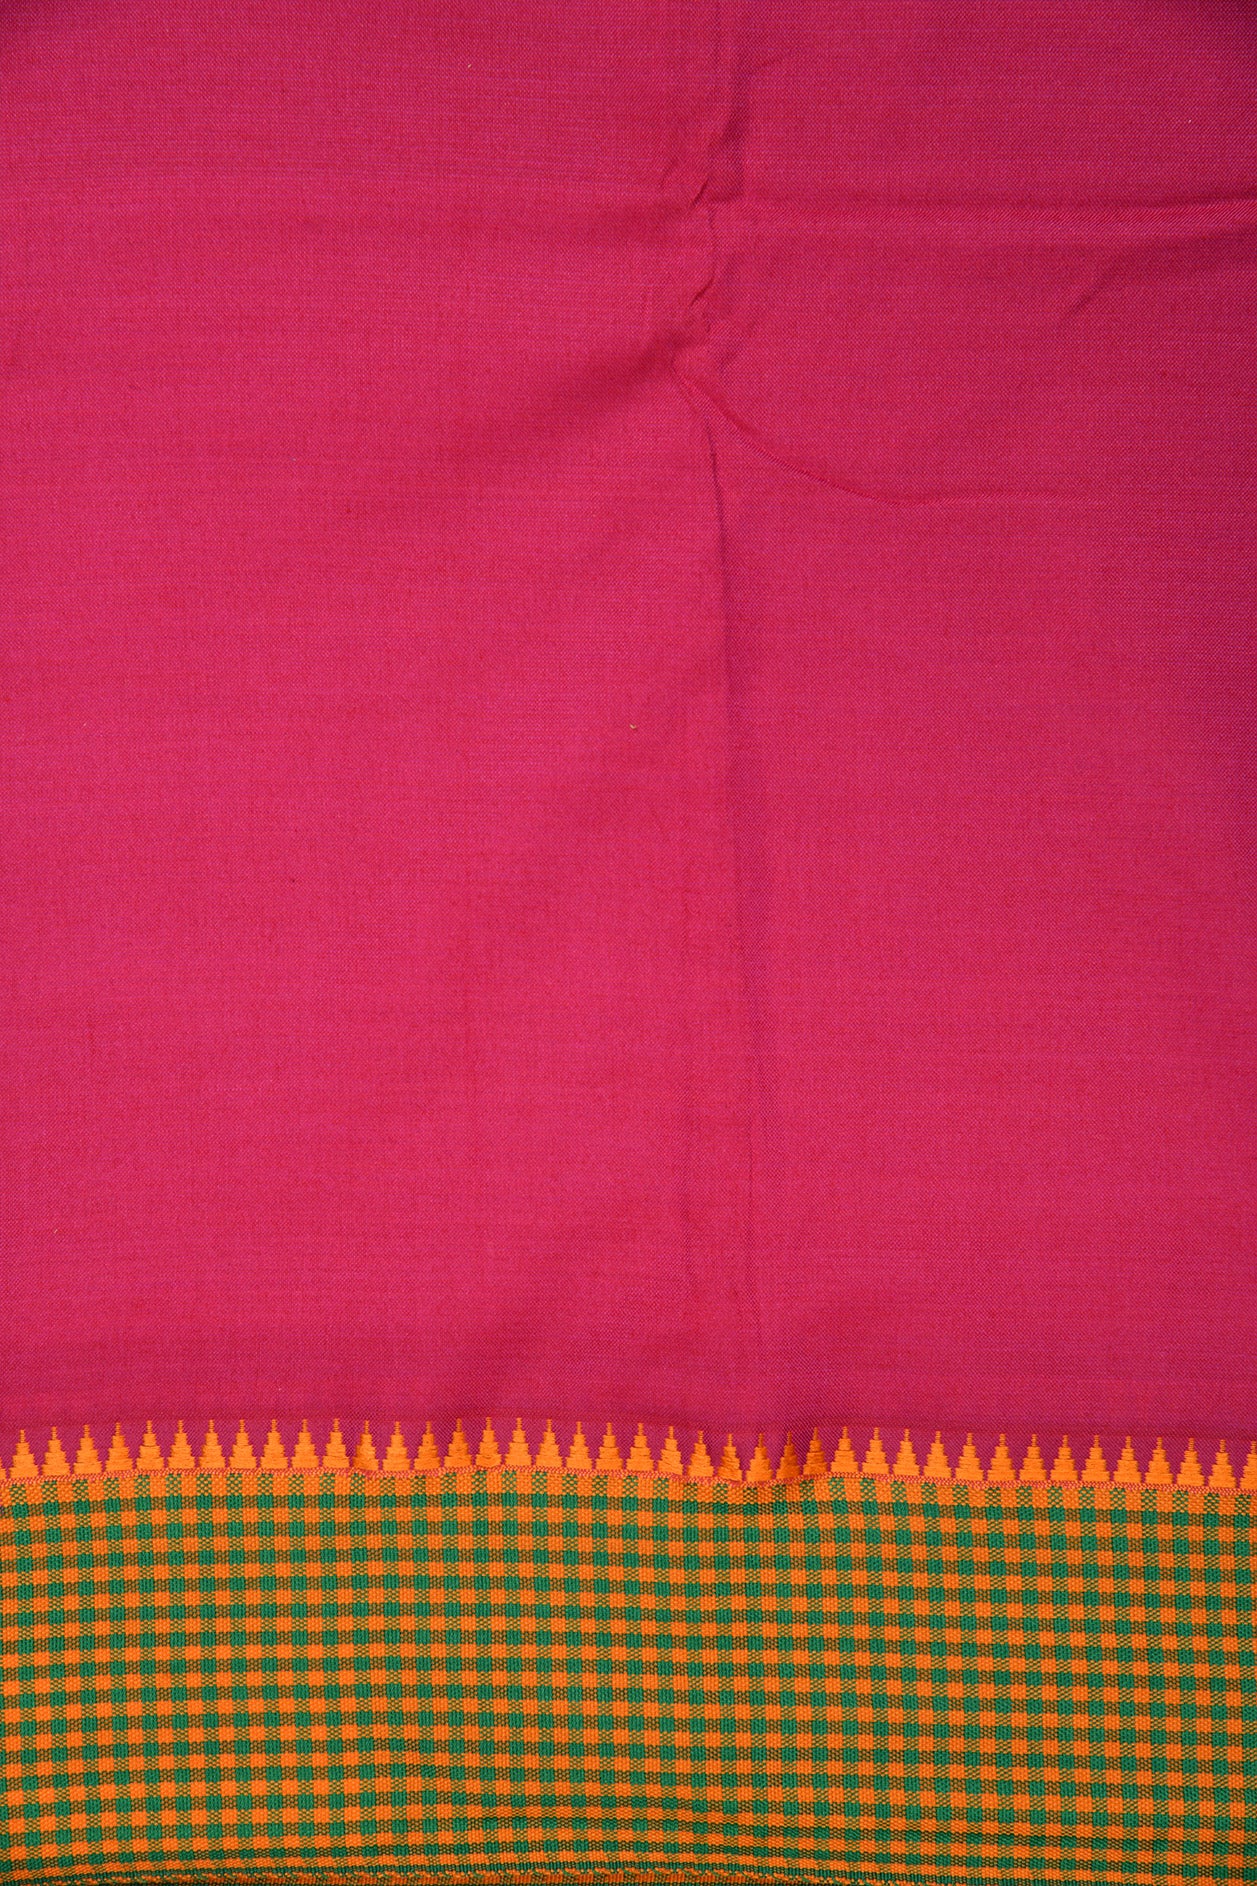 Checked Border With Pink Dharwad Cotton Saree